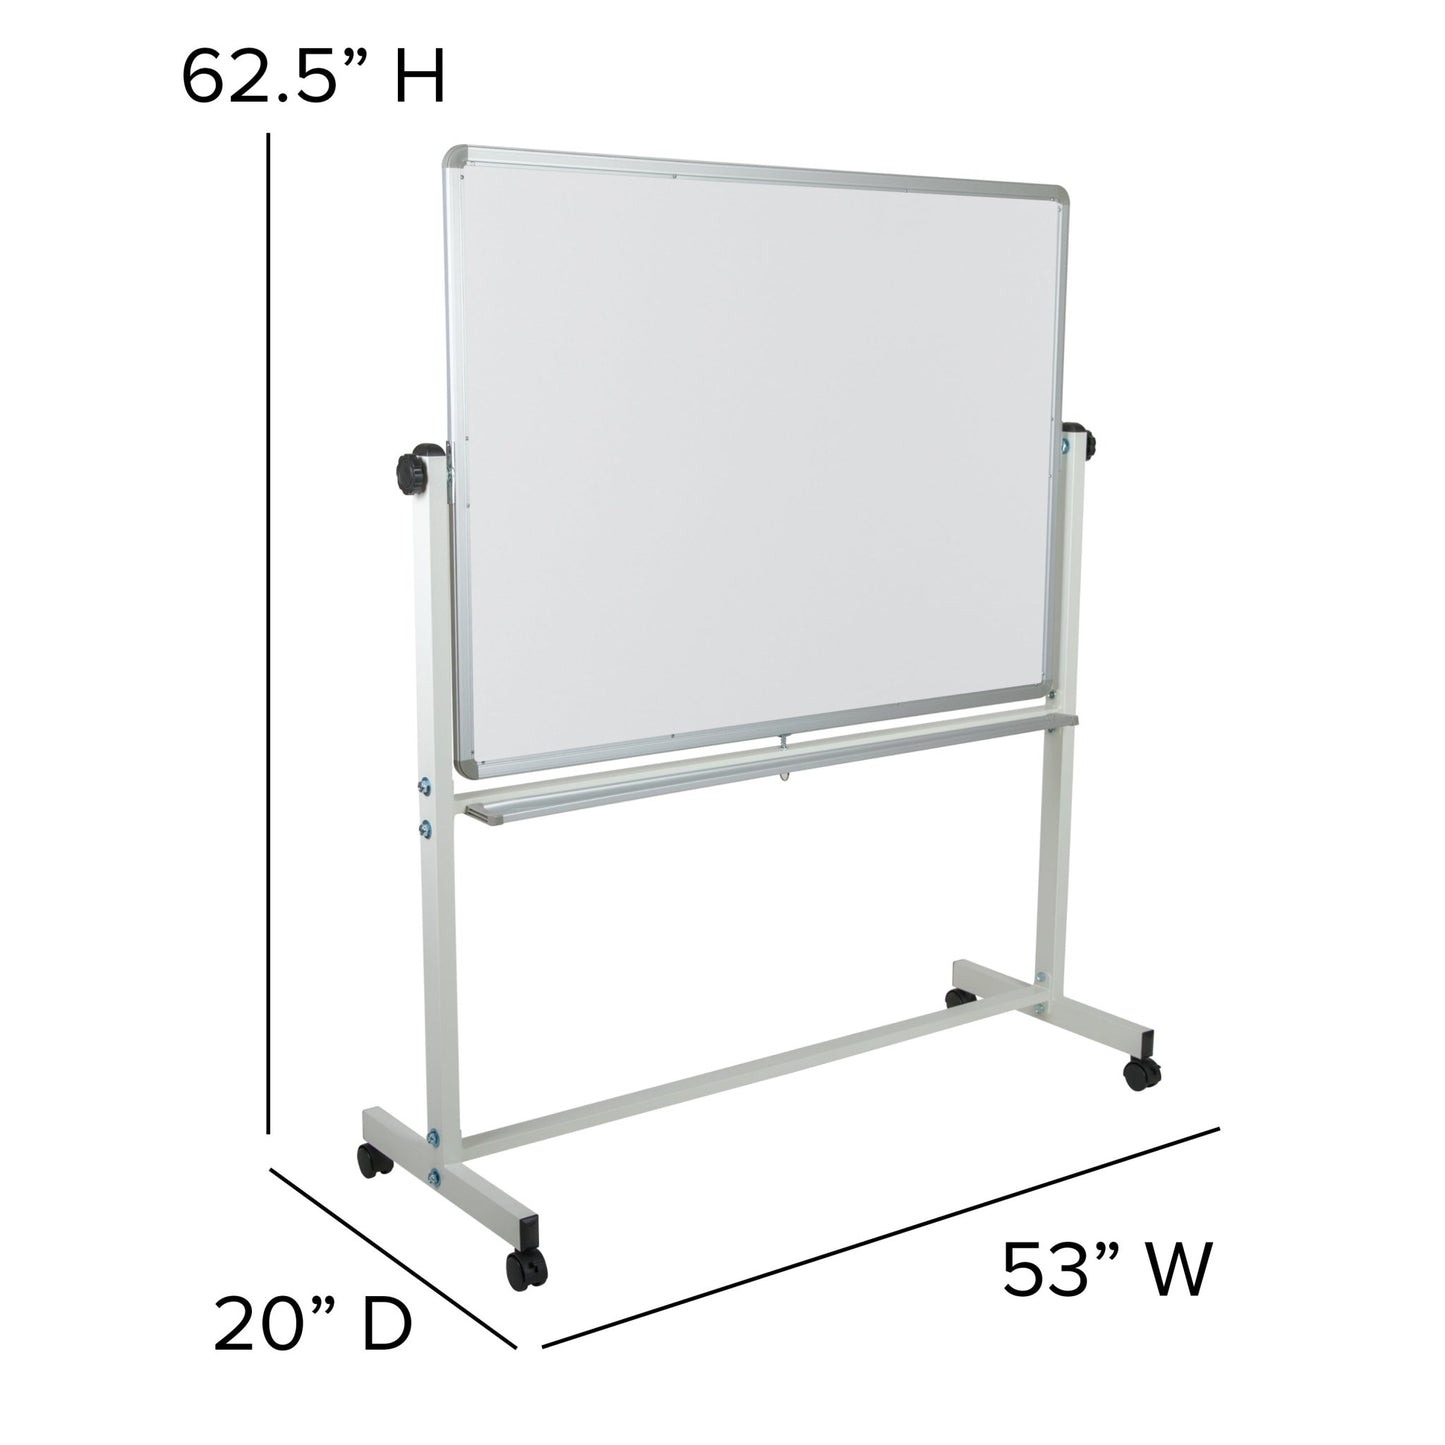 HERCULES Series 53"W x 62.5"H Double-Sided Mobile White Board with Pen Tray - SchoolOutlet